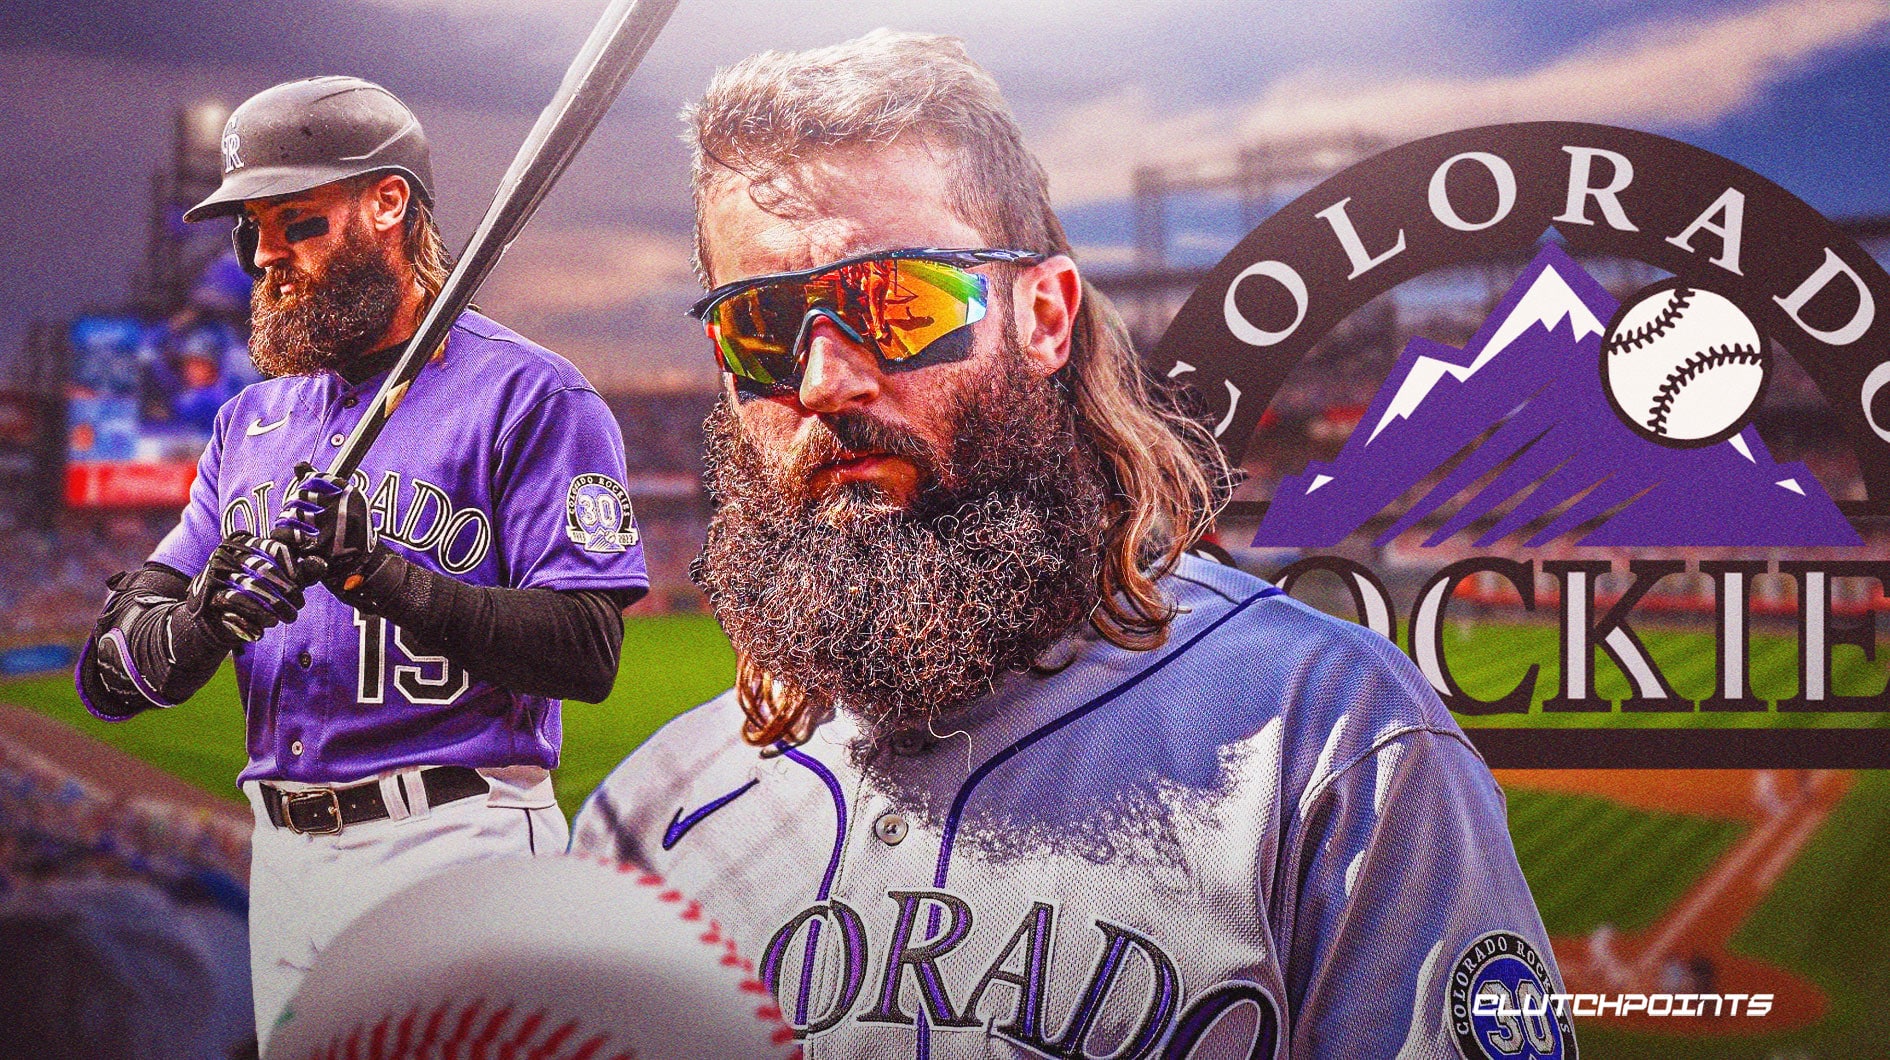 Rockies announce Charlie Blackmon agreed to a one-year contract